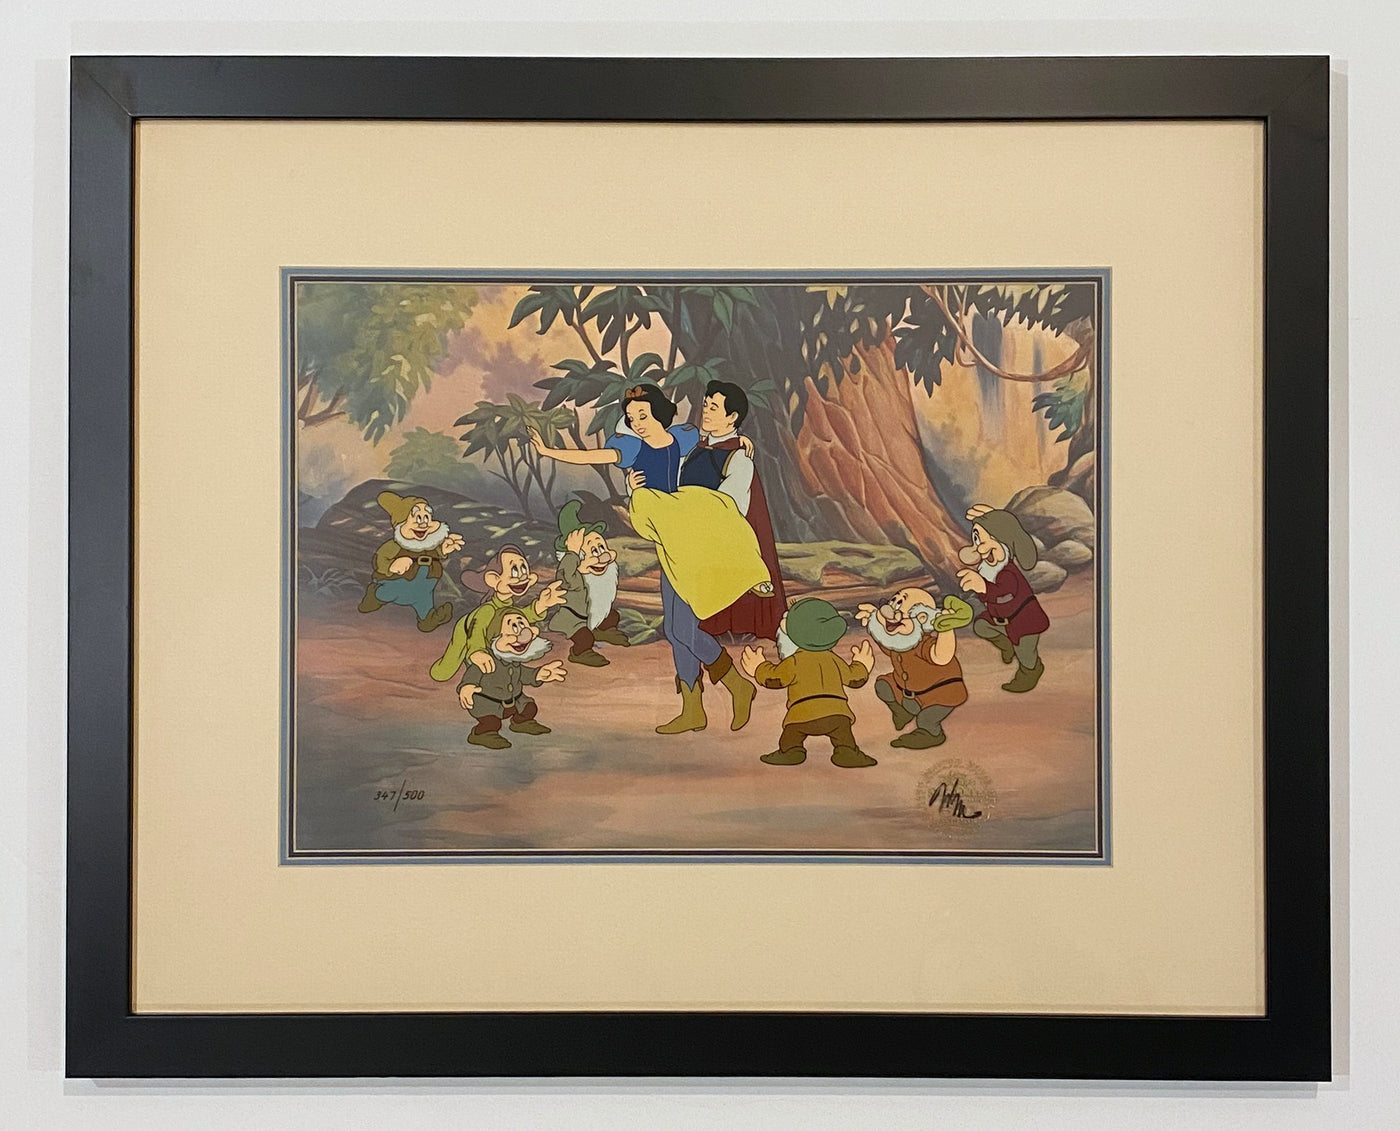 Original Walt Disney Limited Edition Cel from Snow White featuring Snow White, The Prince, and the Dwarfs